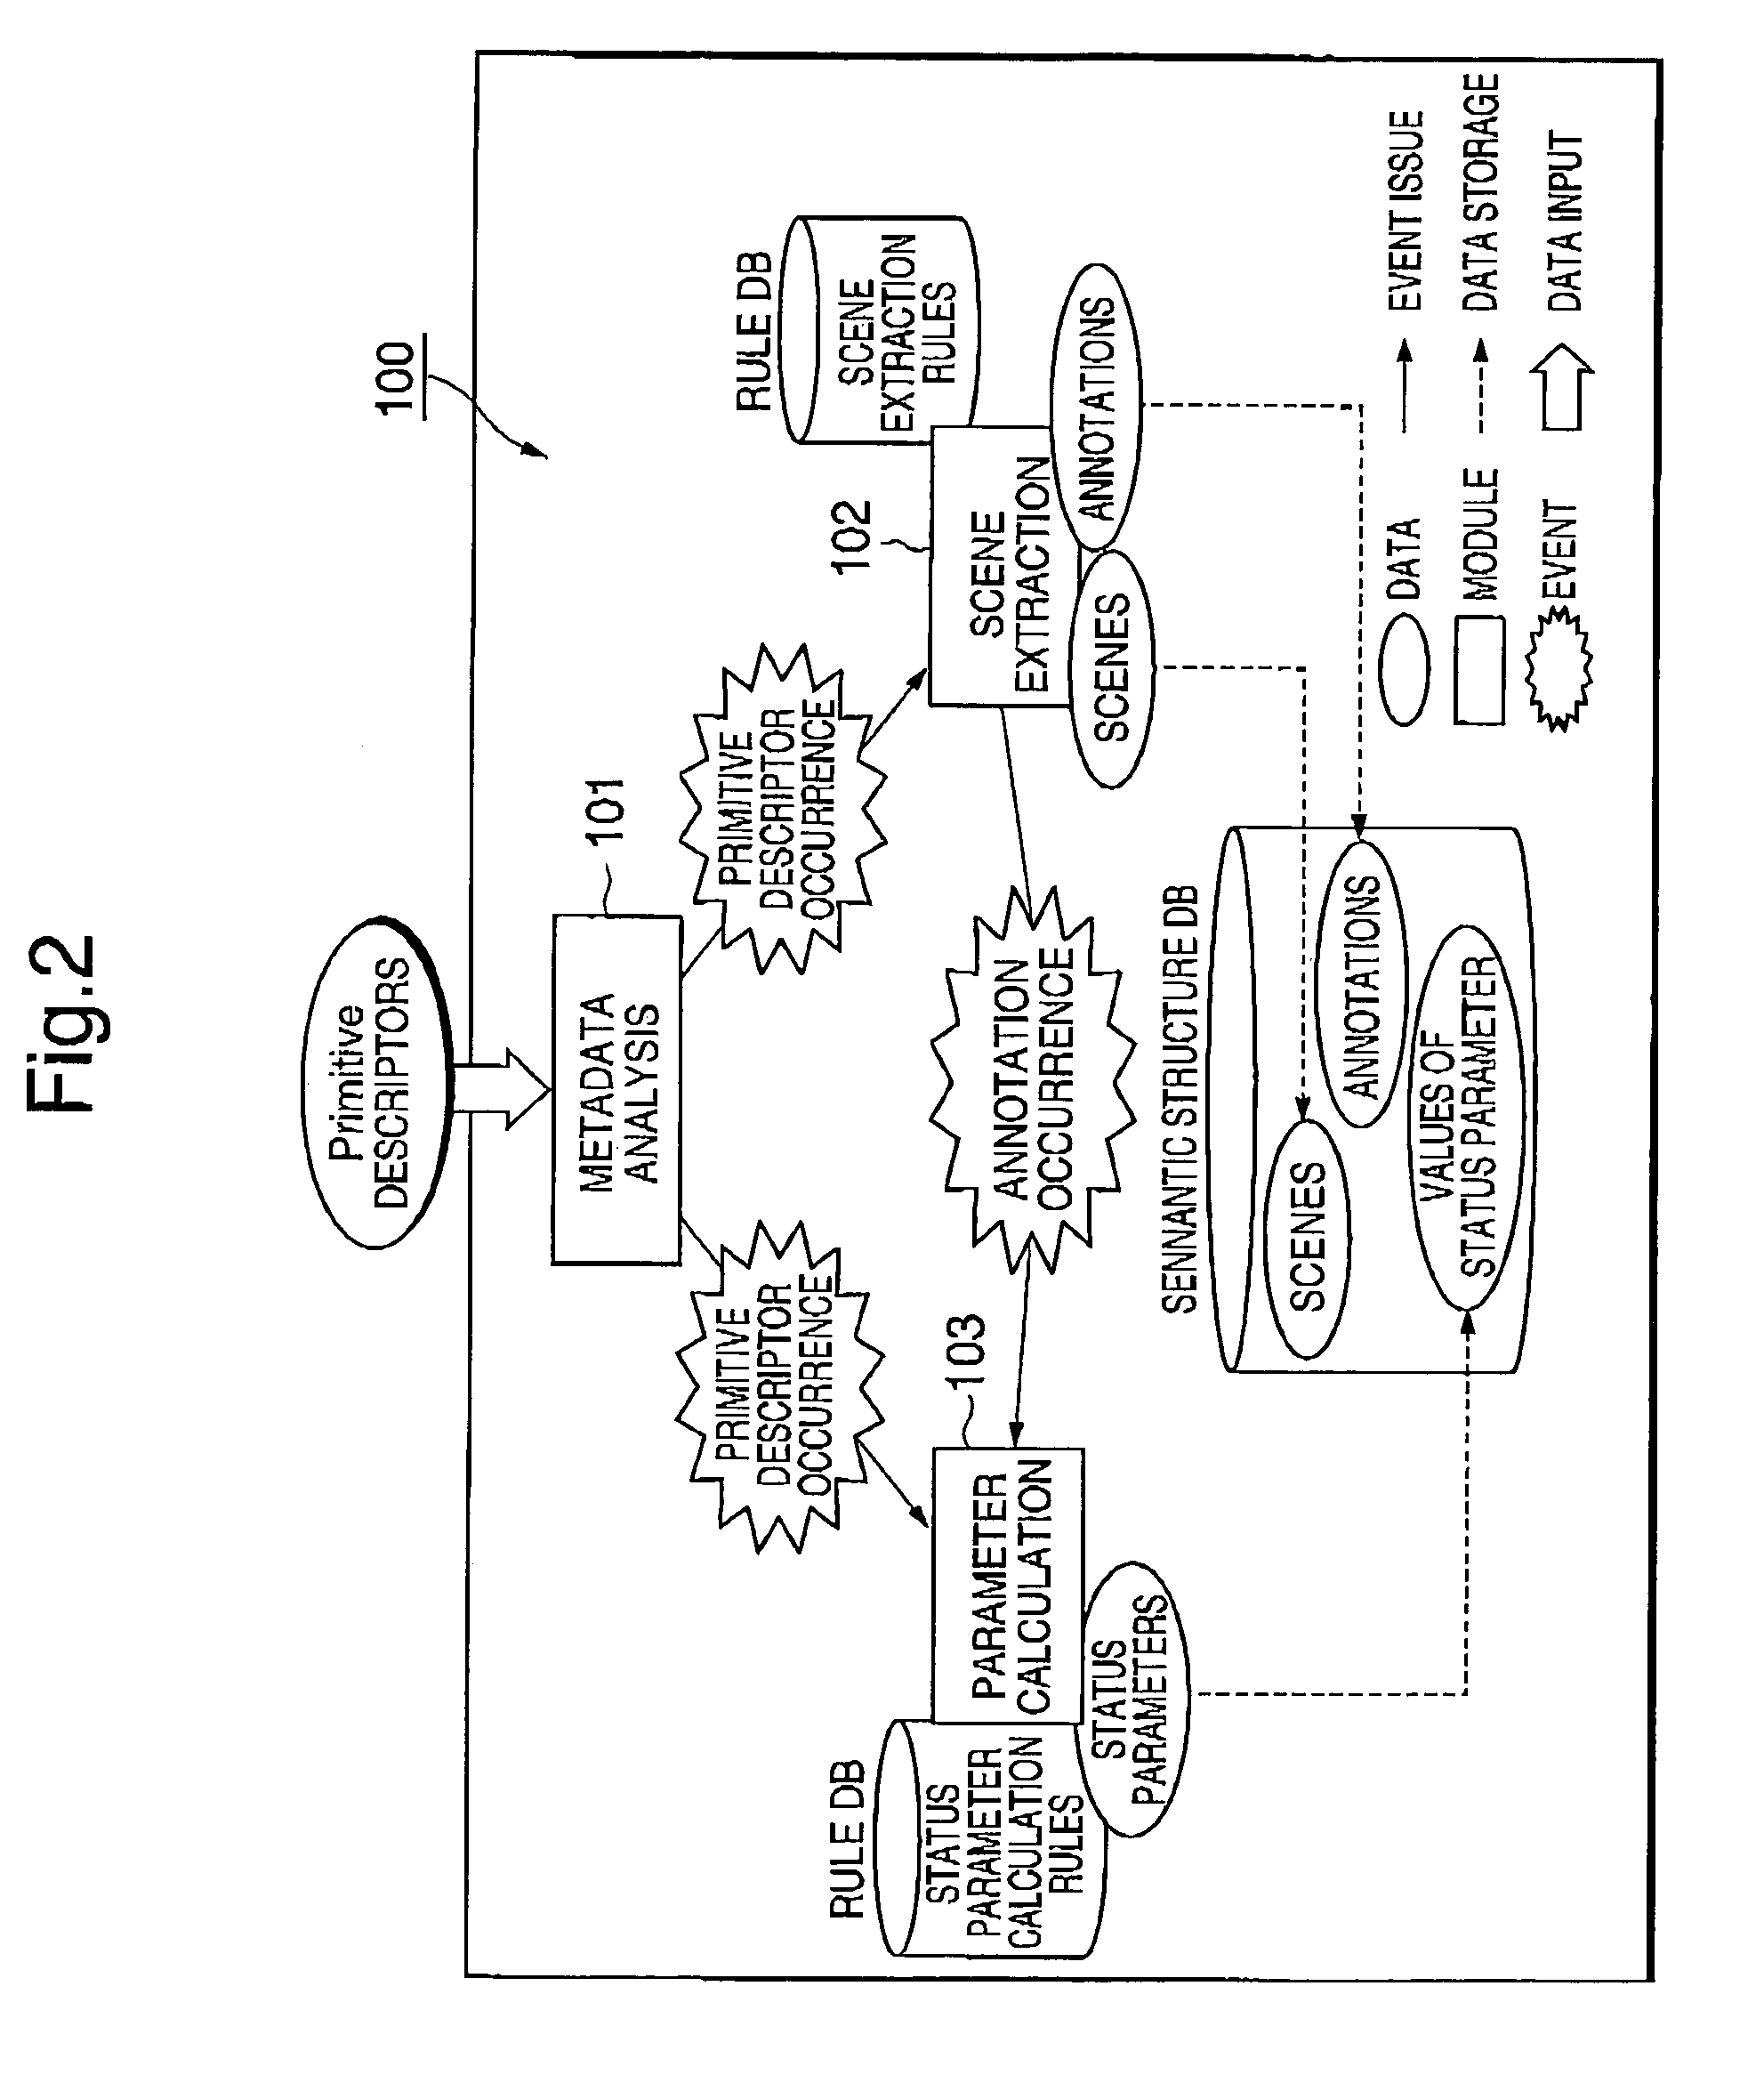 Method and system for dynamically generating digest from event footage and associated metadata